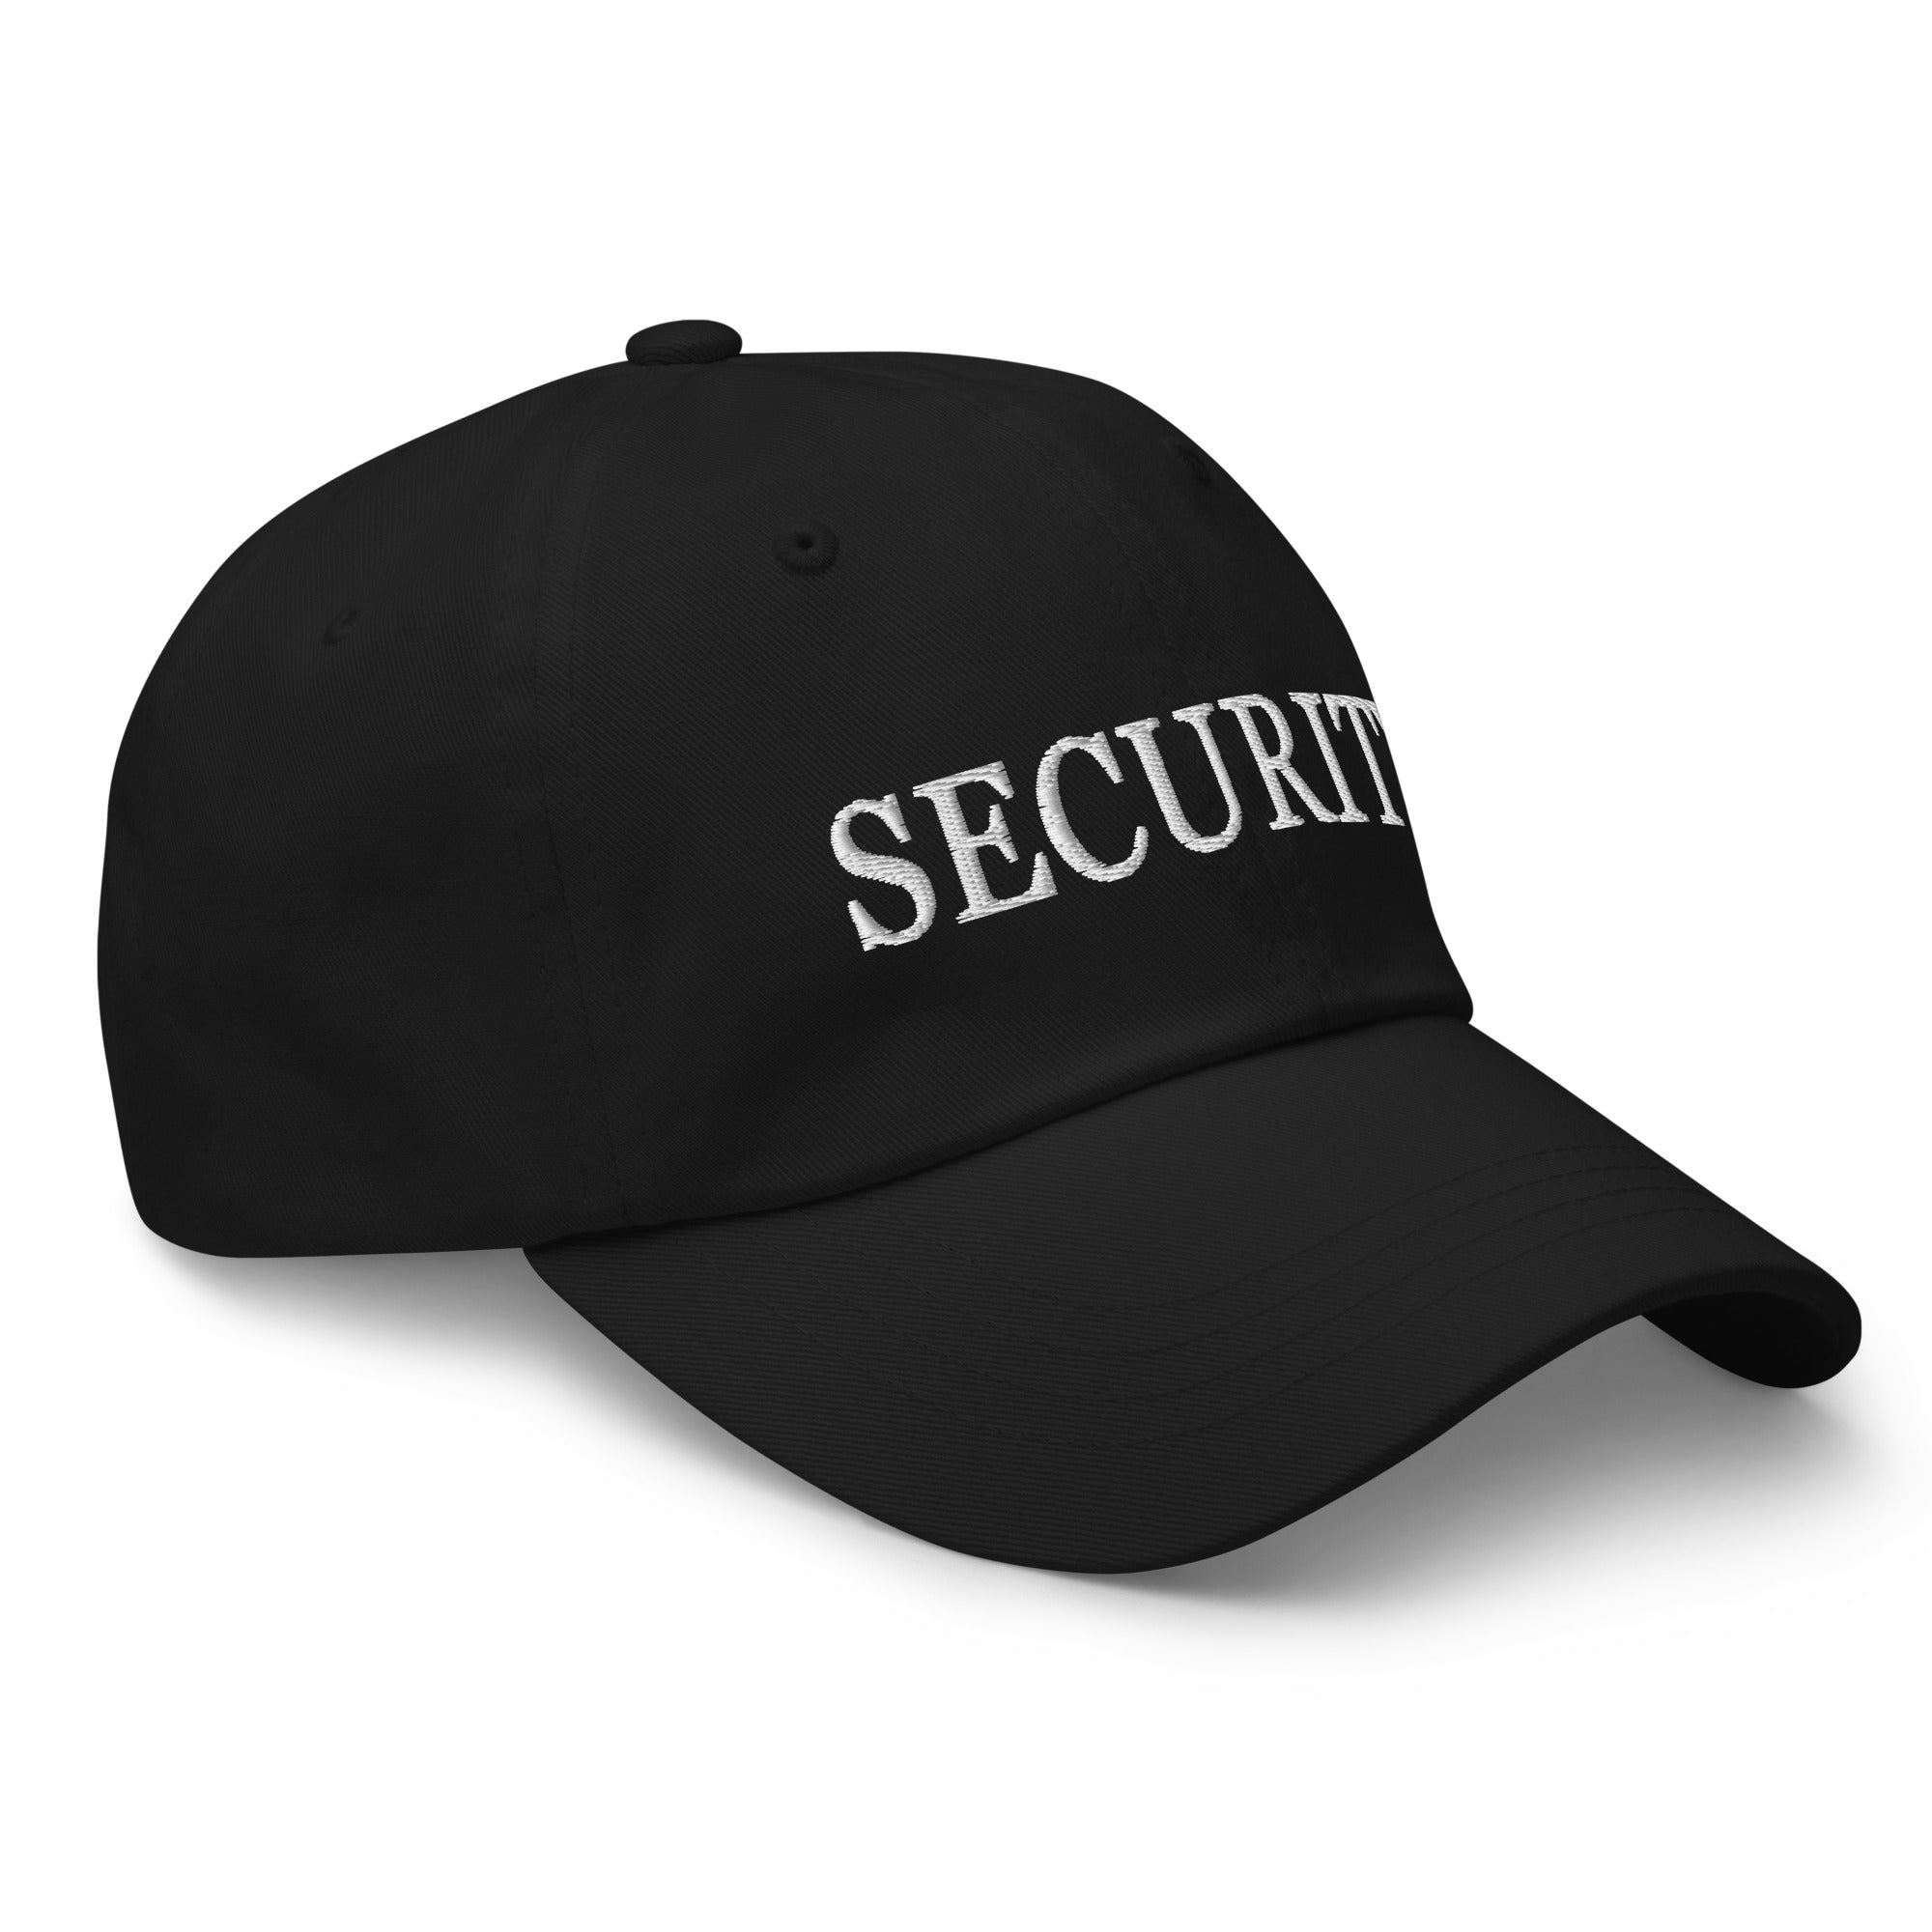 Security Embroidered Baseball Cap FNAF Cosplay Five Nights at Freddy's Dad hat - Edge of Life Designs